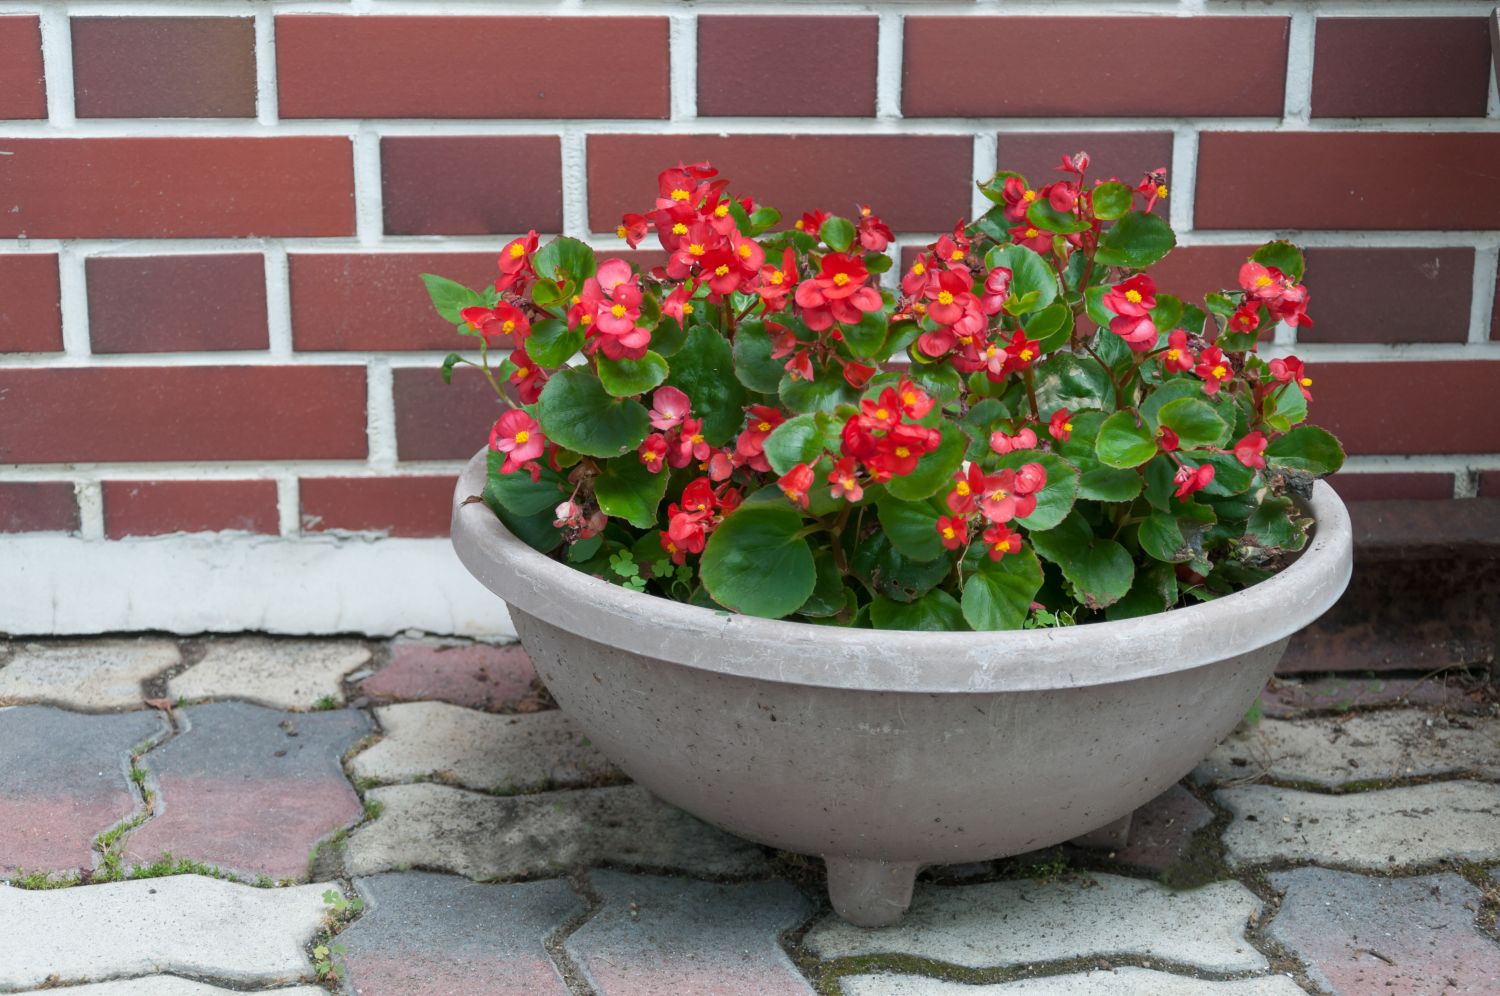 Potted wax begonias in bloom